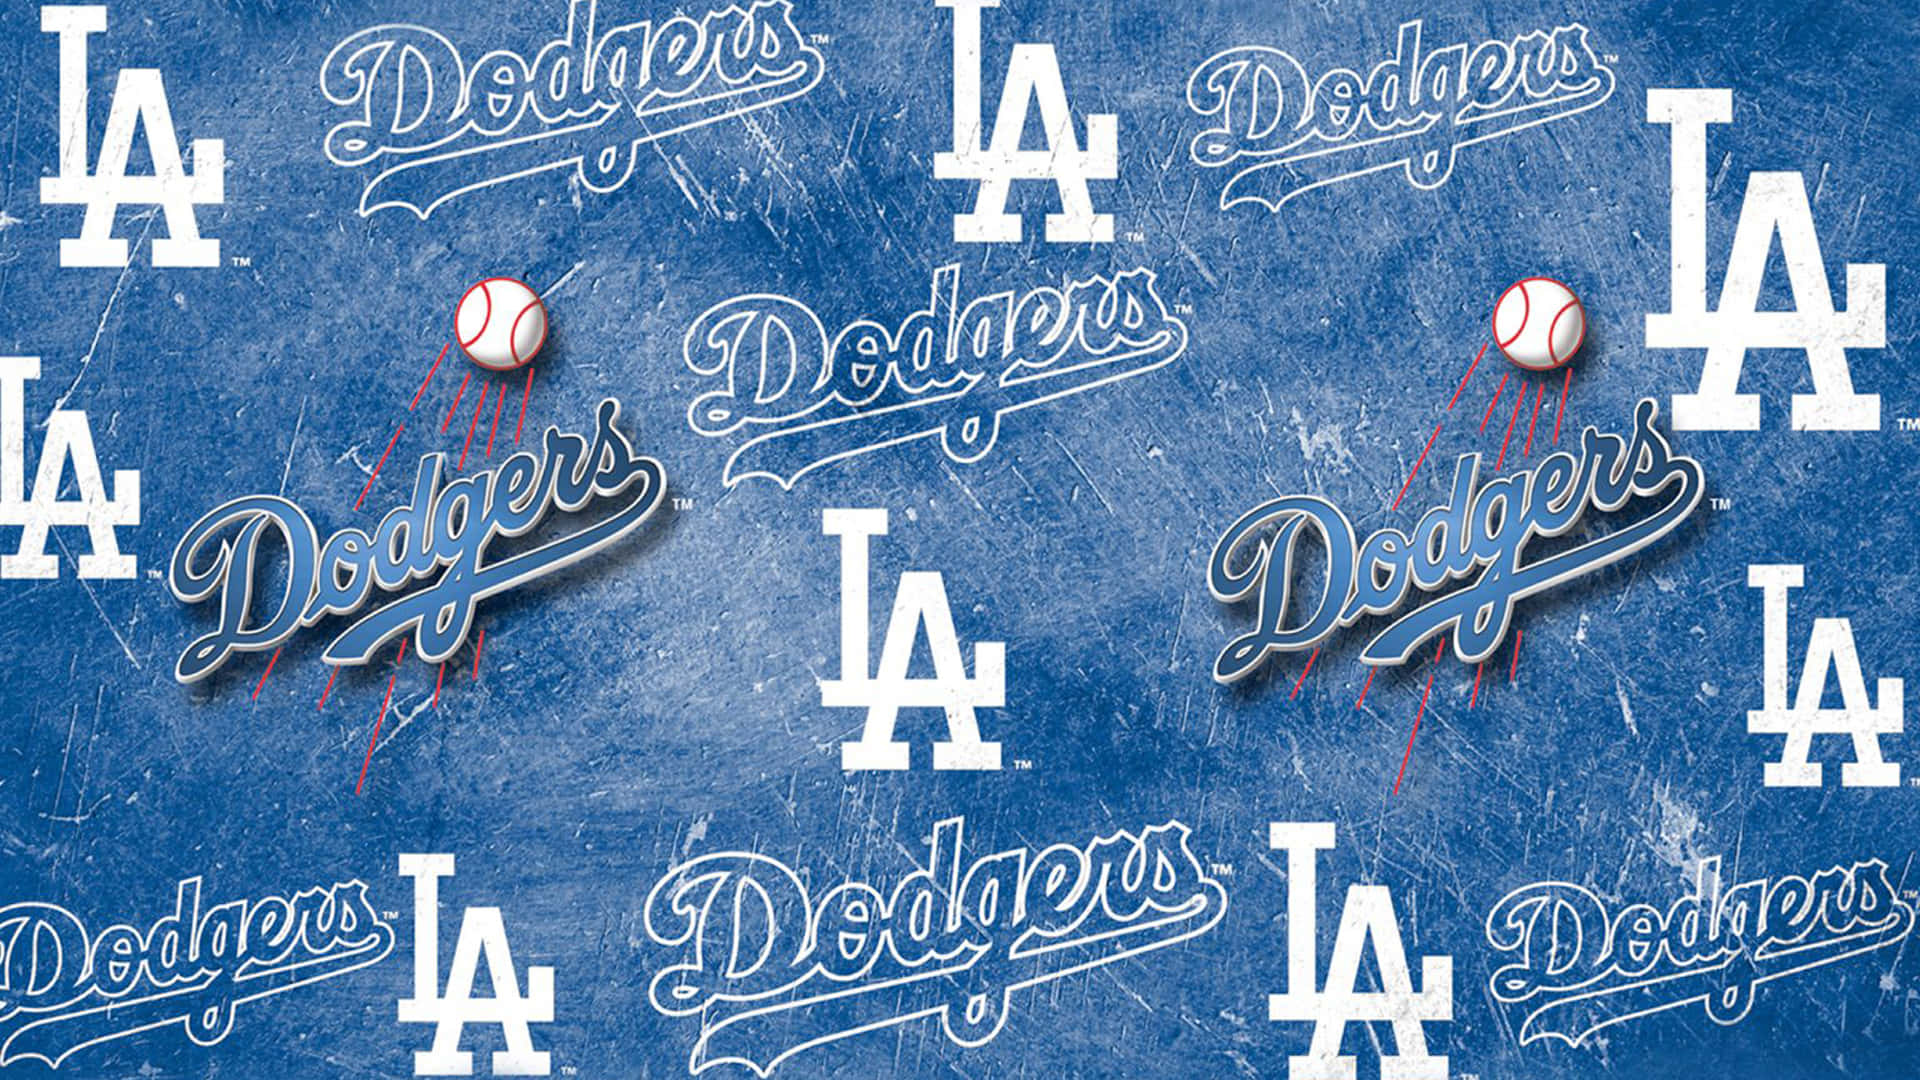 200+] Dodgers Backgrounds